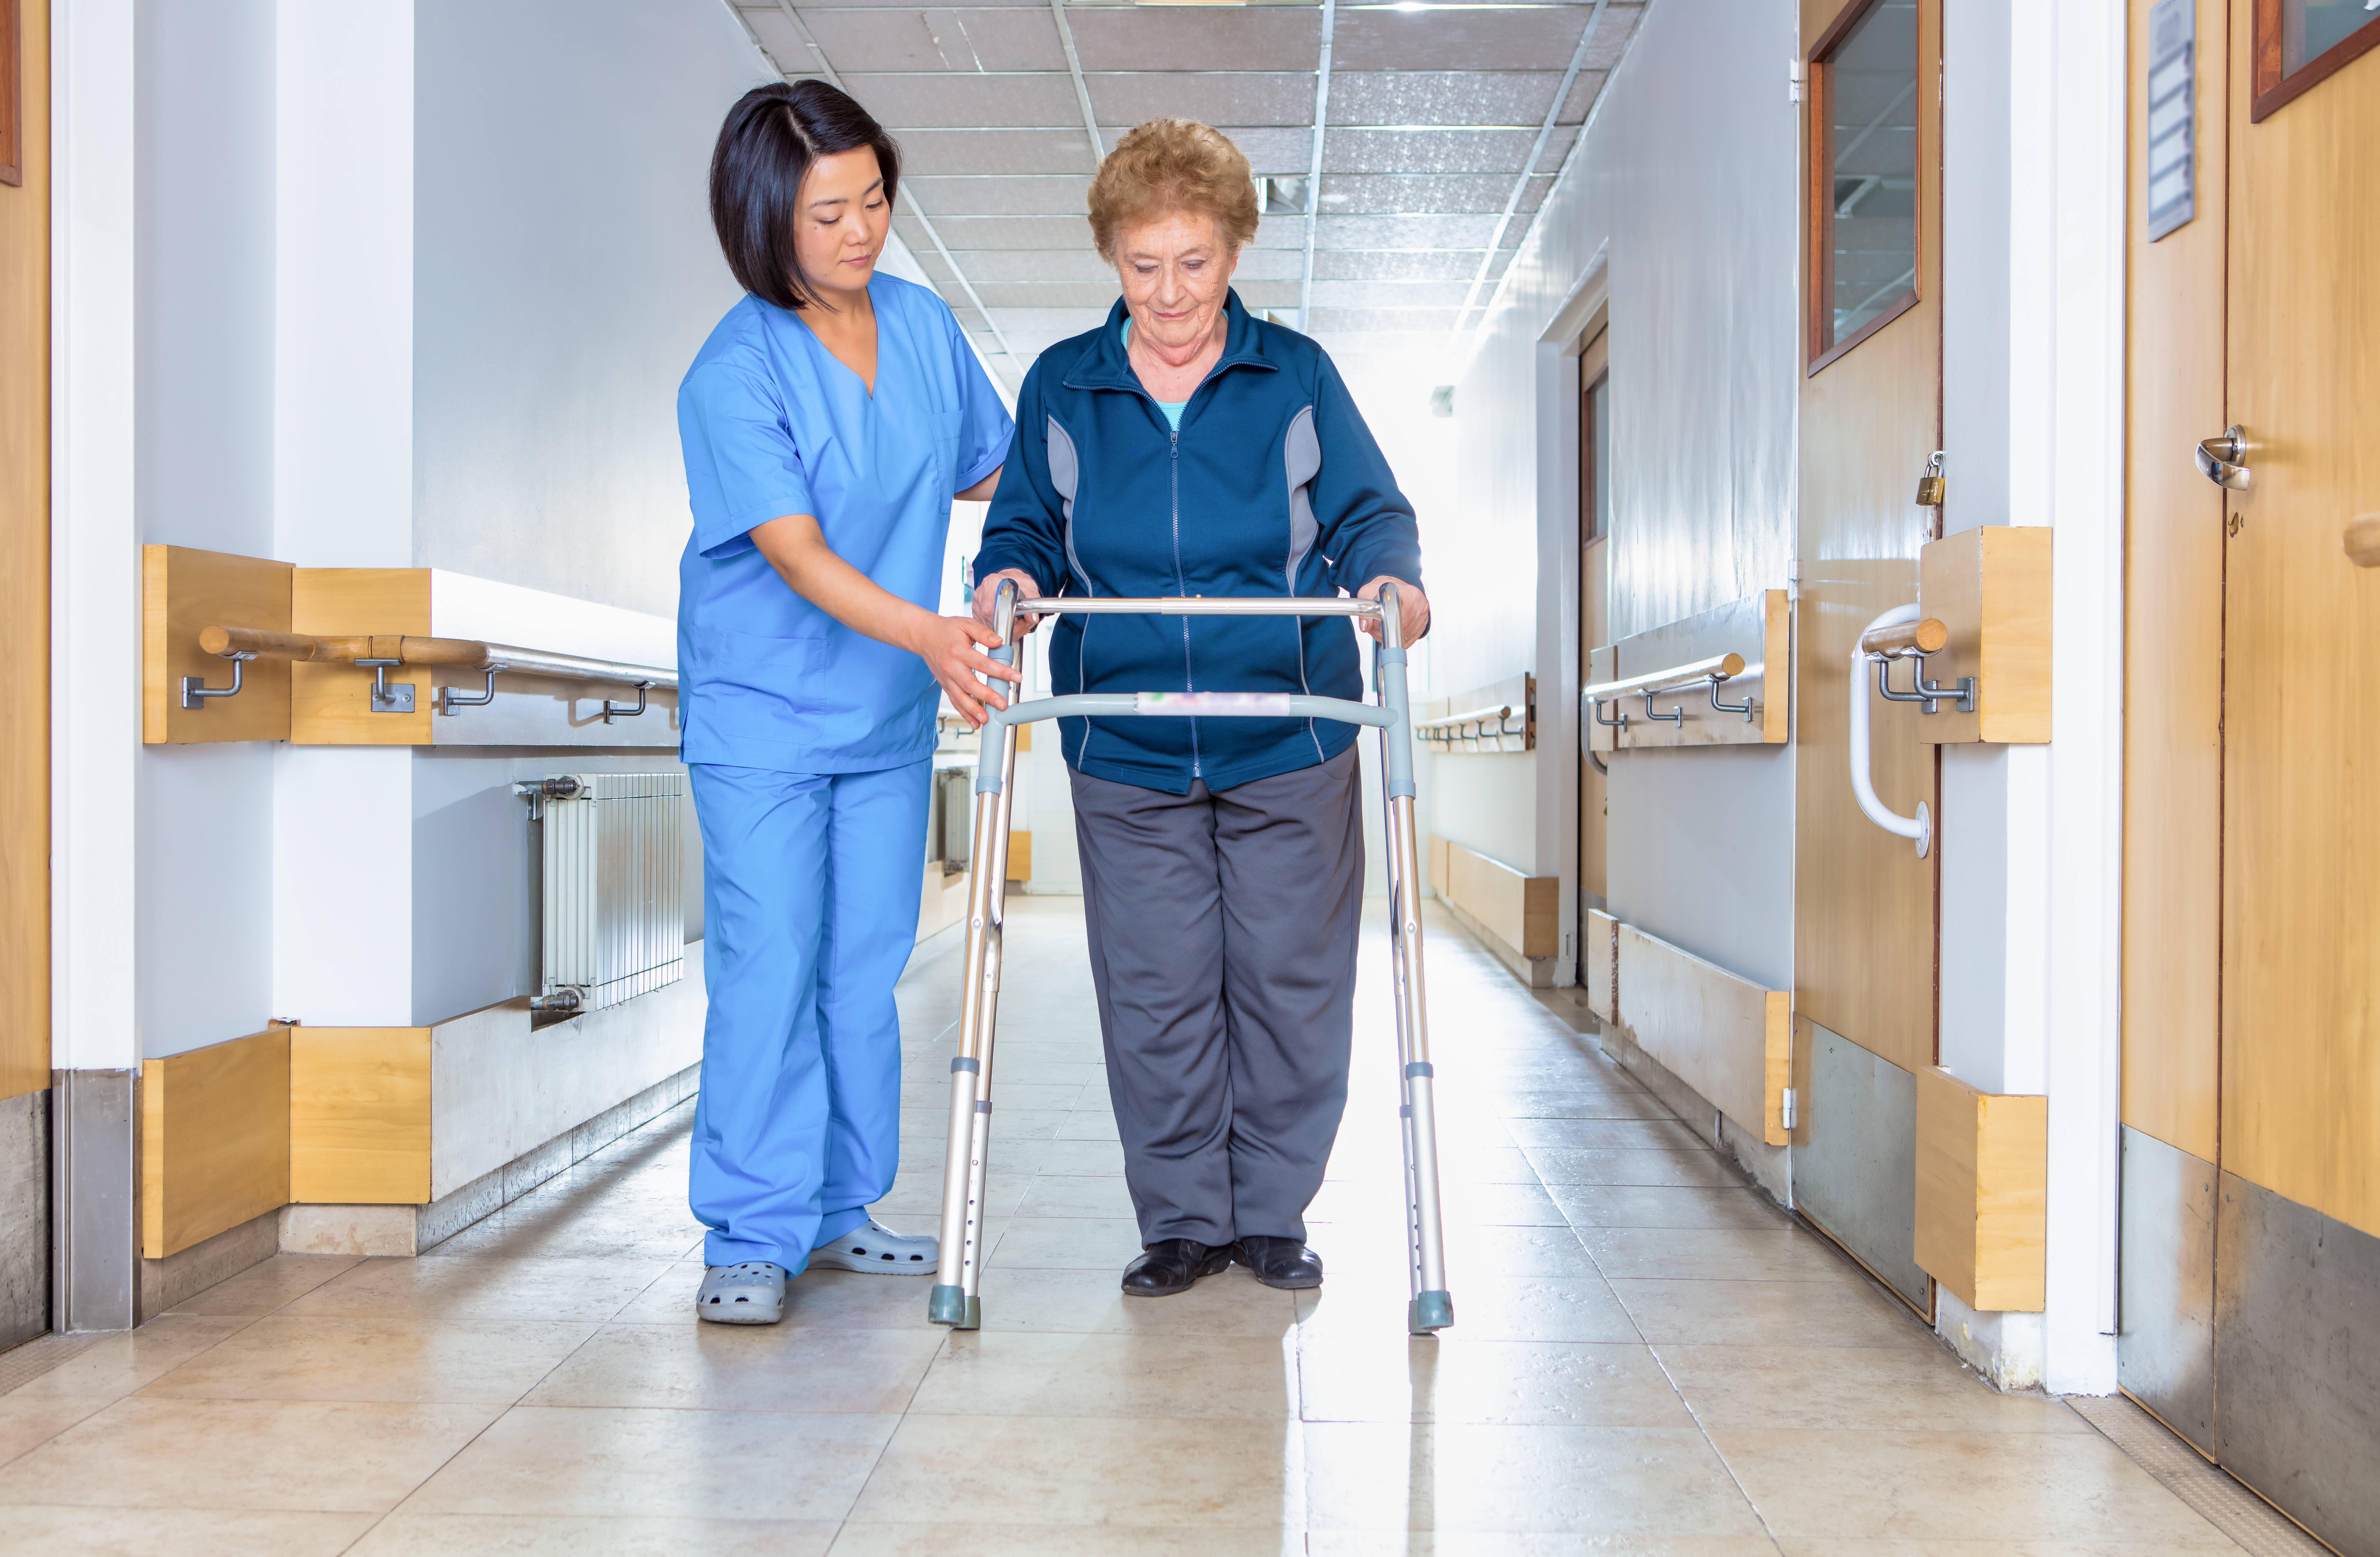 A female healthcare professional dressed in hospital attire assisting an elderly female patient with a walker in the hallway of a hospital.